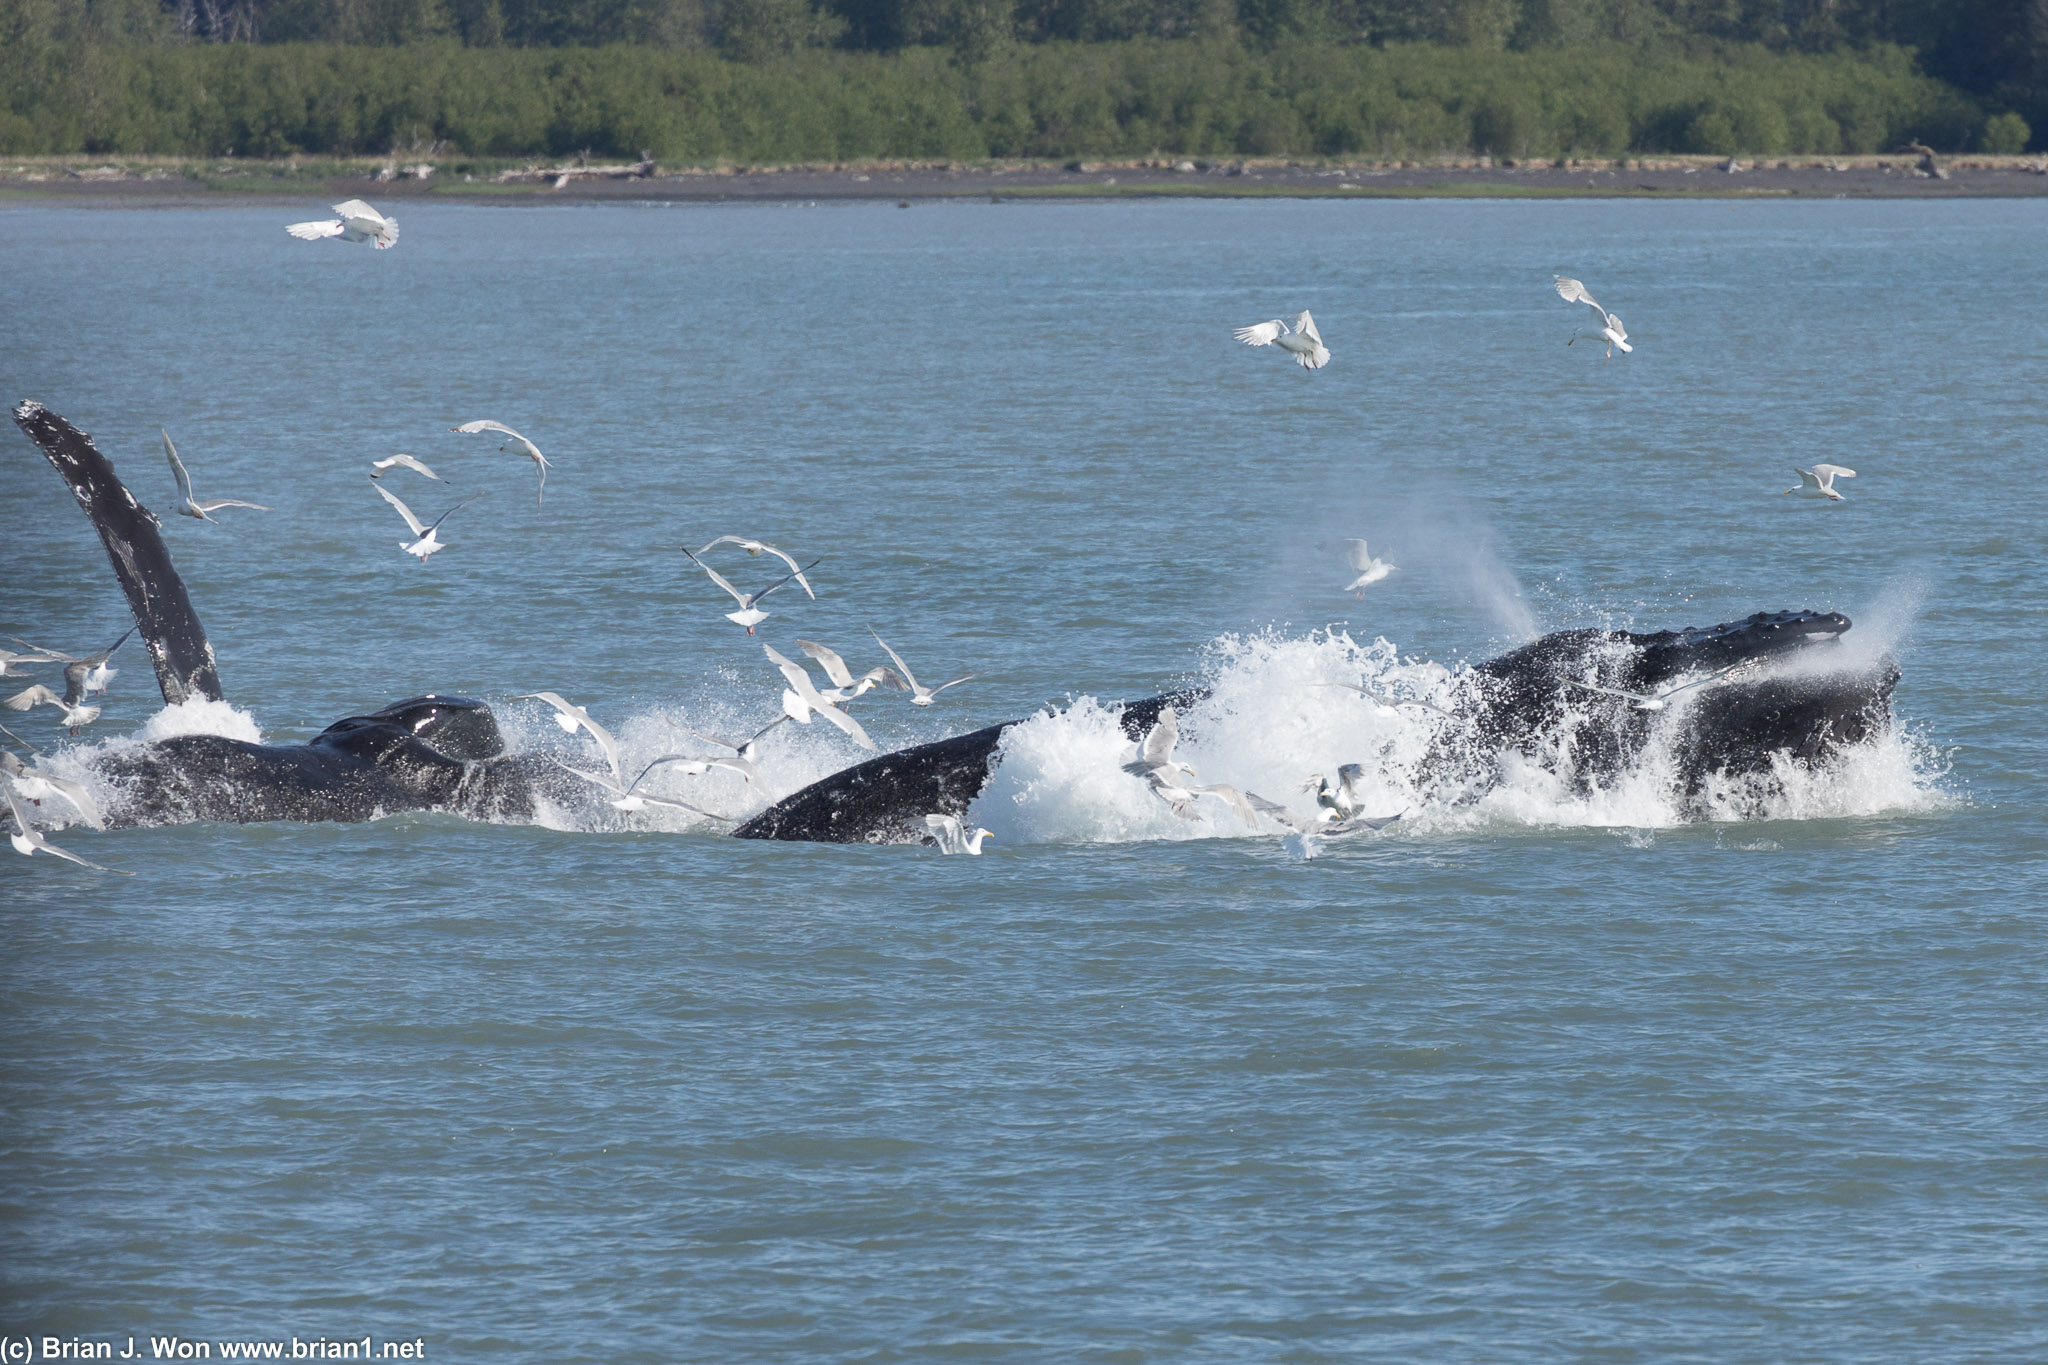 One minute from the dock, a pair of humpback whales!